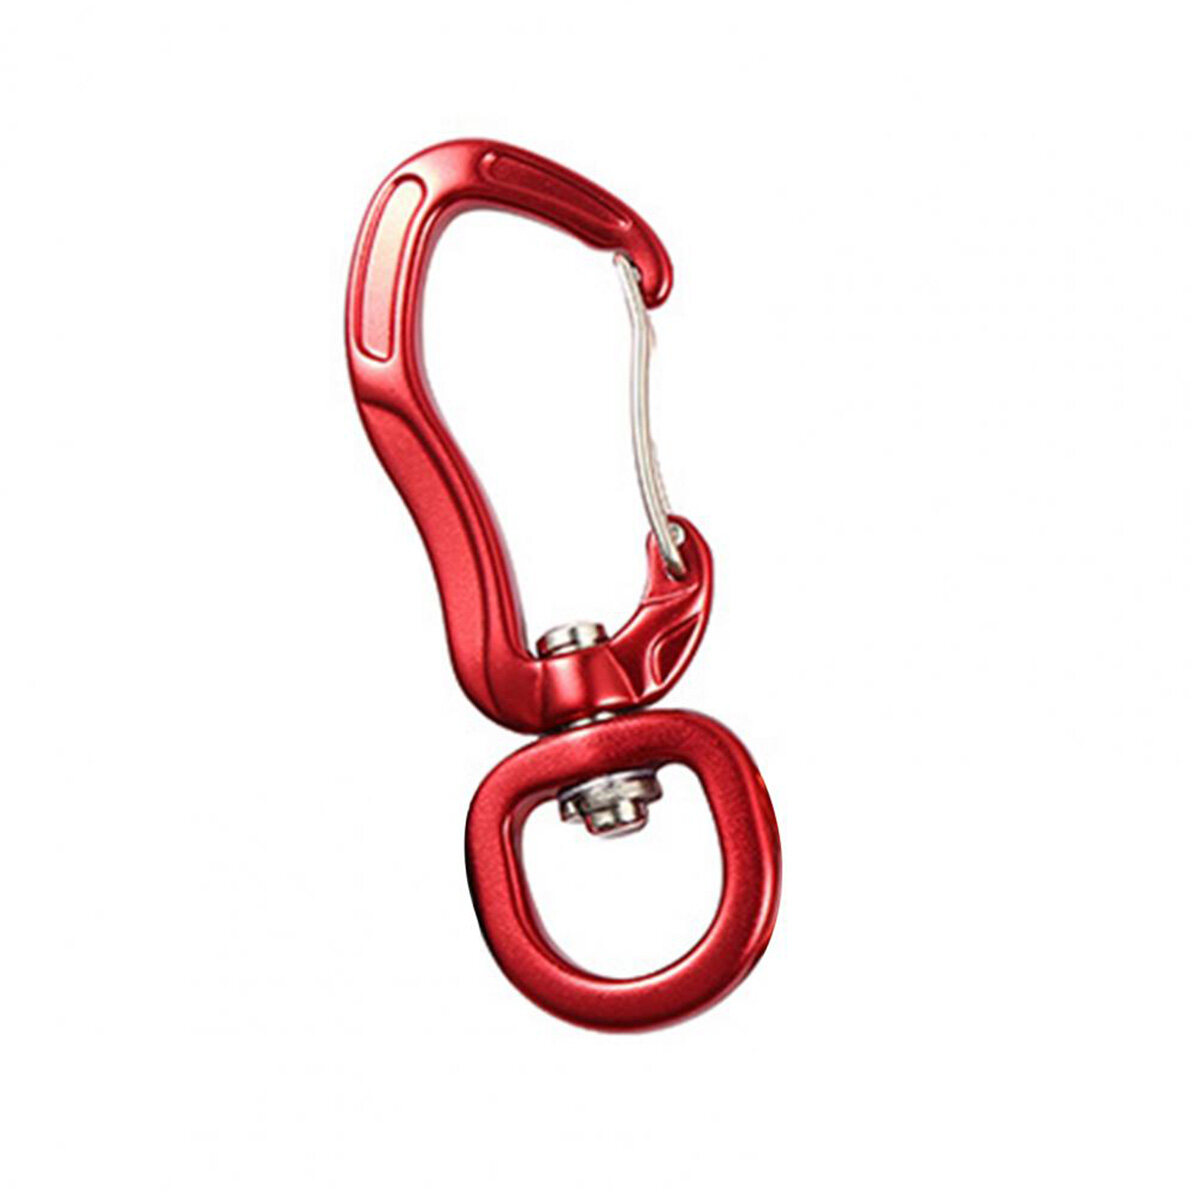 Rock Rotational Bearing Carabiners Swing Swivel Wear Resistant High Hardness Safety Rotational Buckle for Rappelling